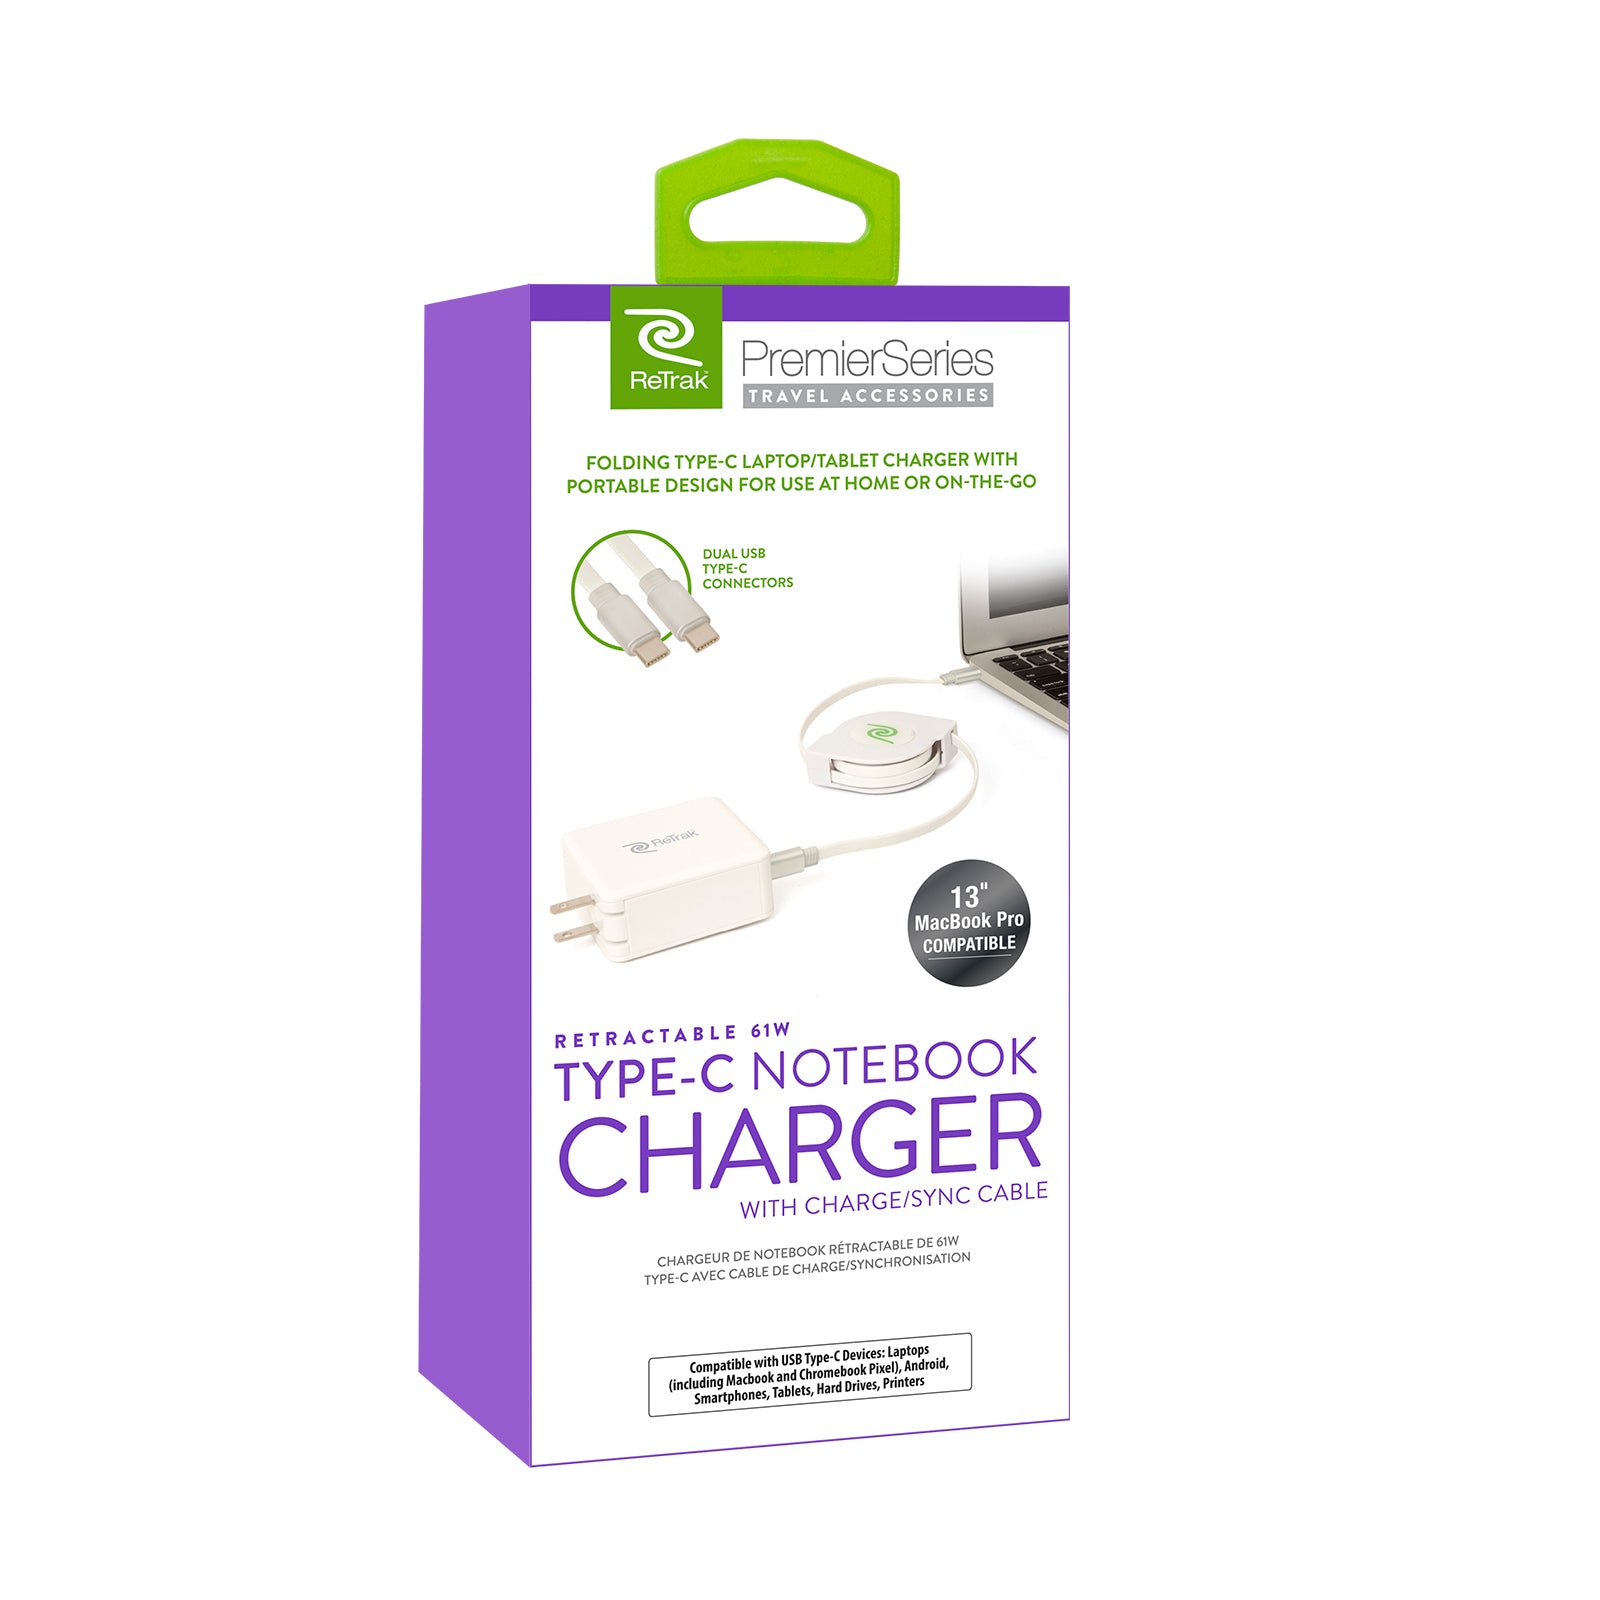 USB-C Charger Notebook | 61W Retractable Charger Cable